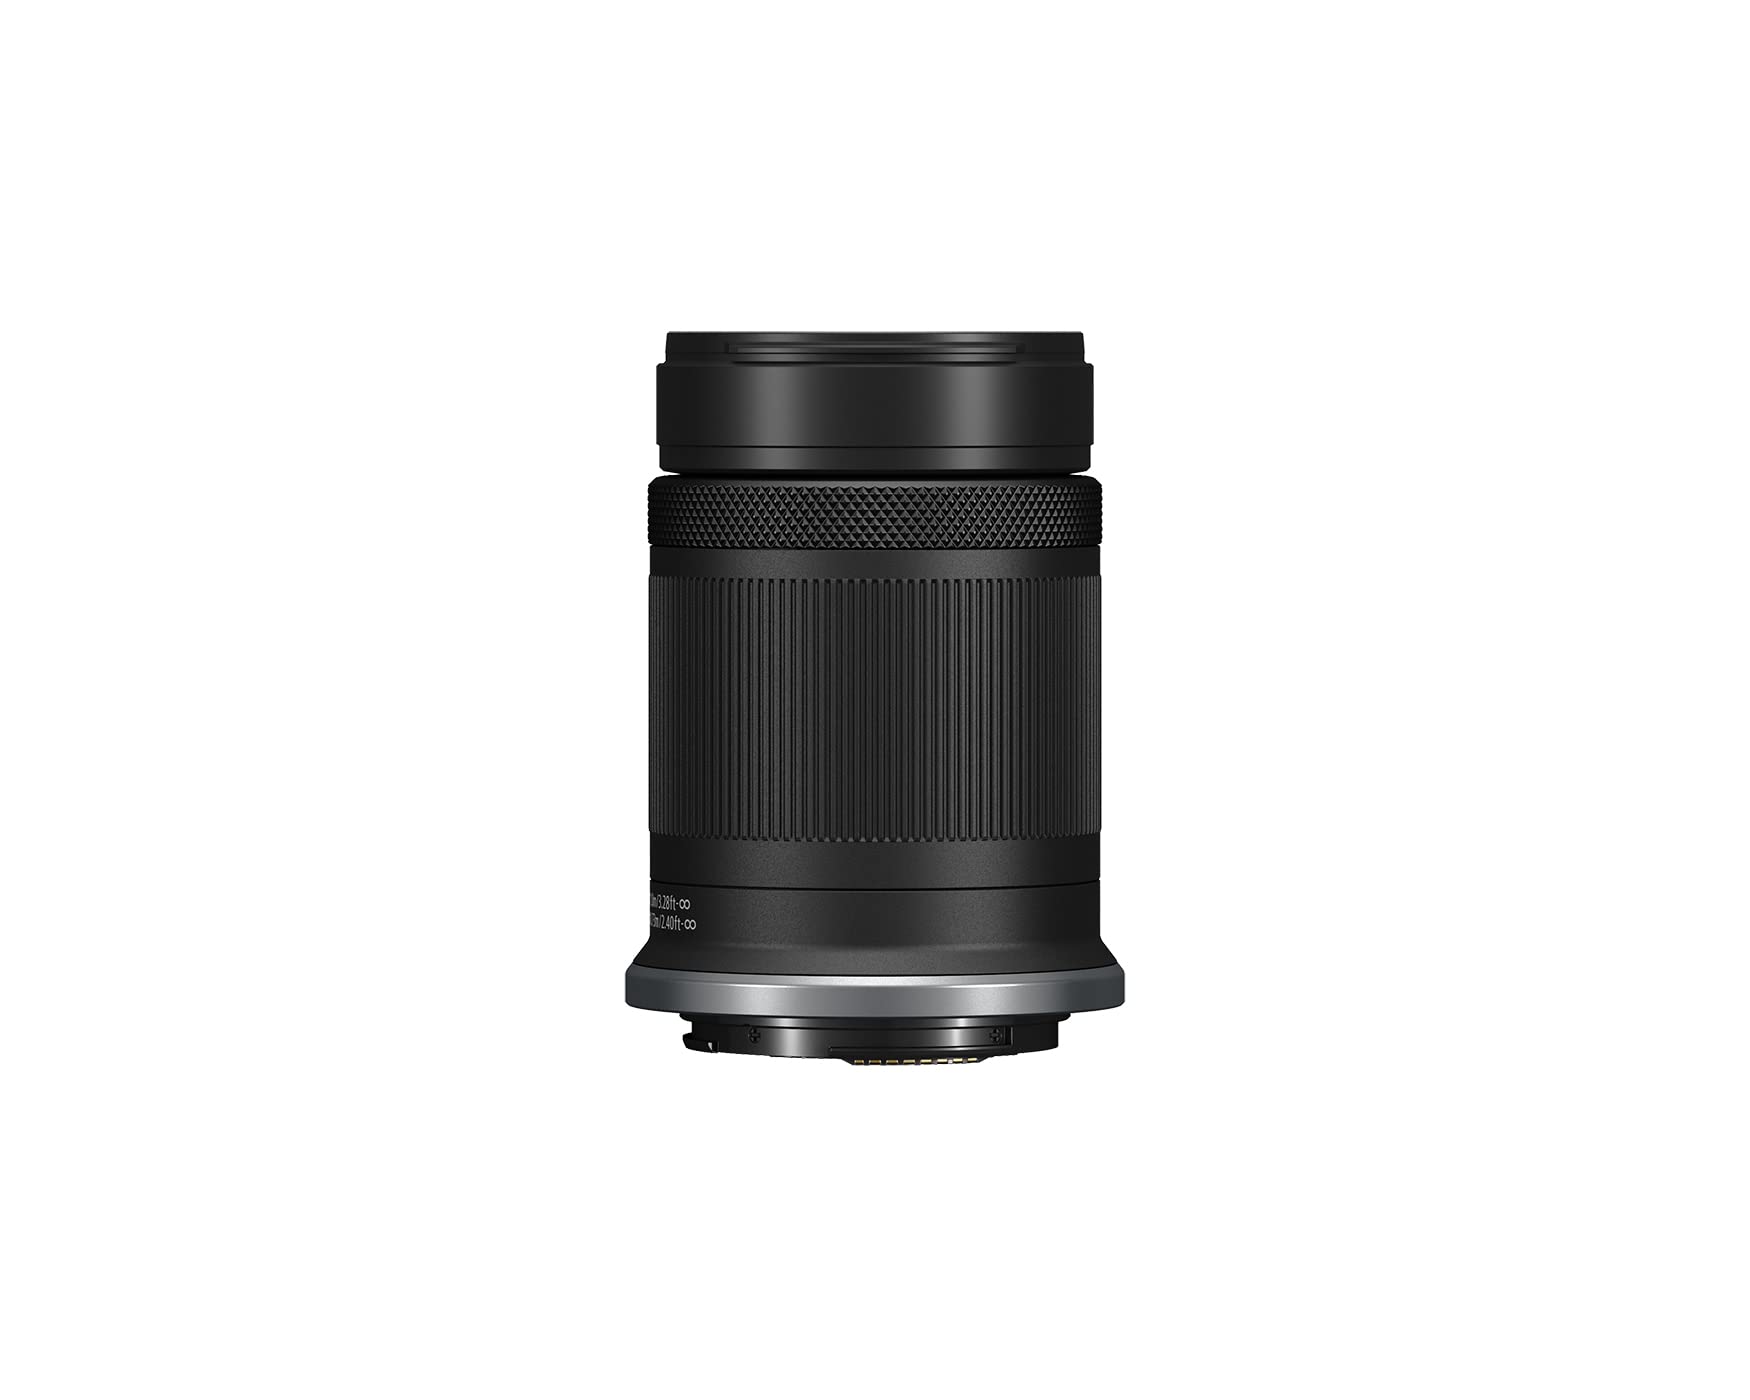 Canon RF-S55-210mm F5-7.1 is STM for Canon APS-C Mirrorless RF Mount Cameras, Telephoto Zoom, Compact, Lightweight, Optical Image Stabilization, for Landscape, Portrait, & Travel Photos/Videos